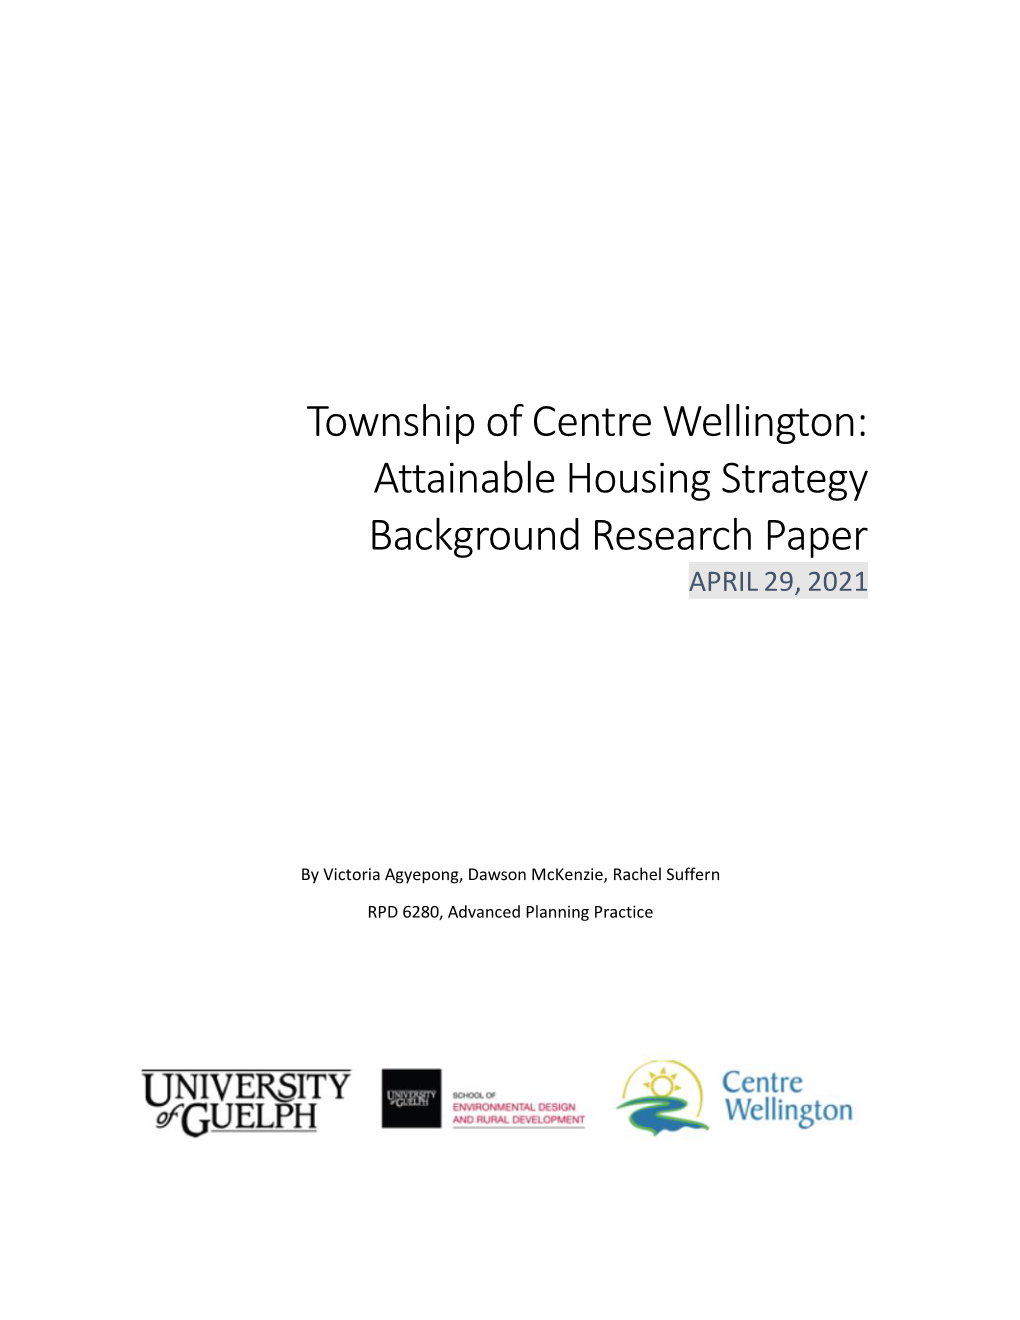 Attainable Housing Strategy Background Research Paper APRIL 29, 2021